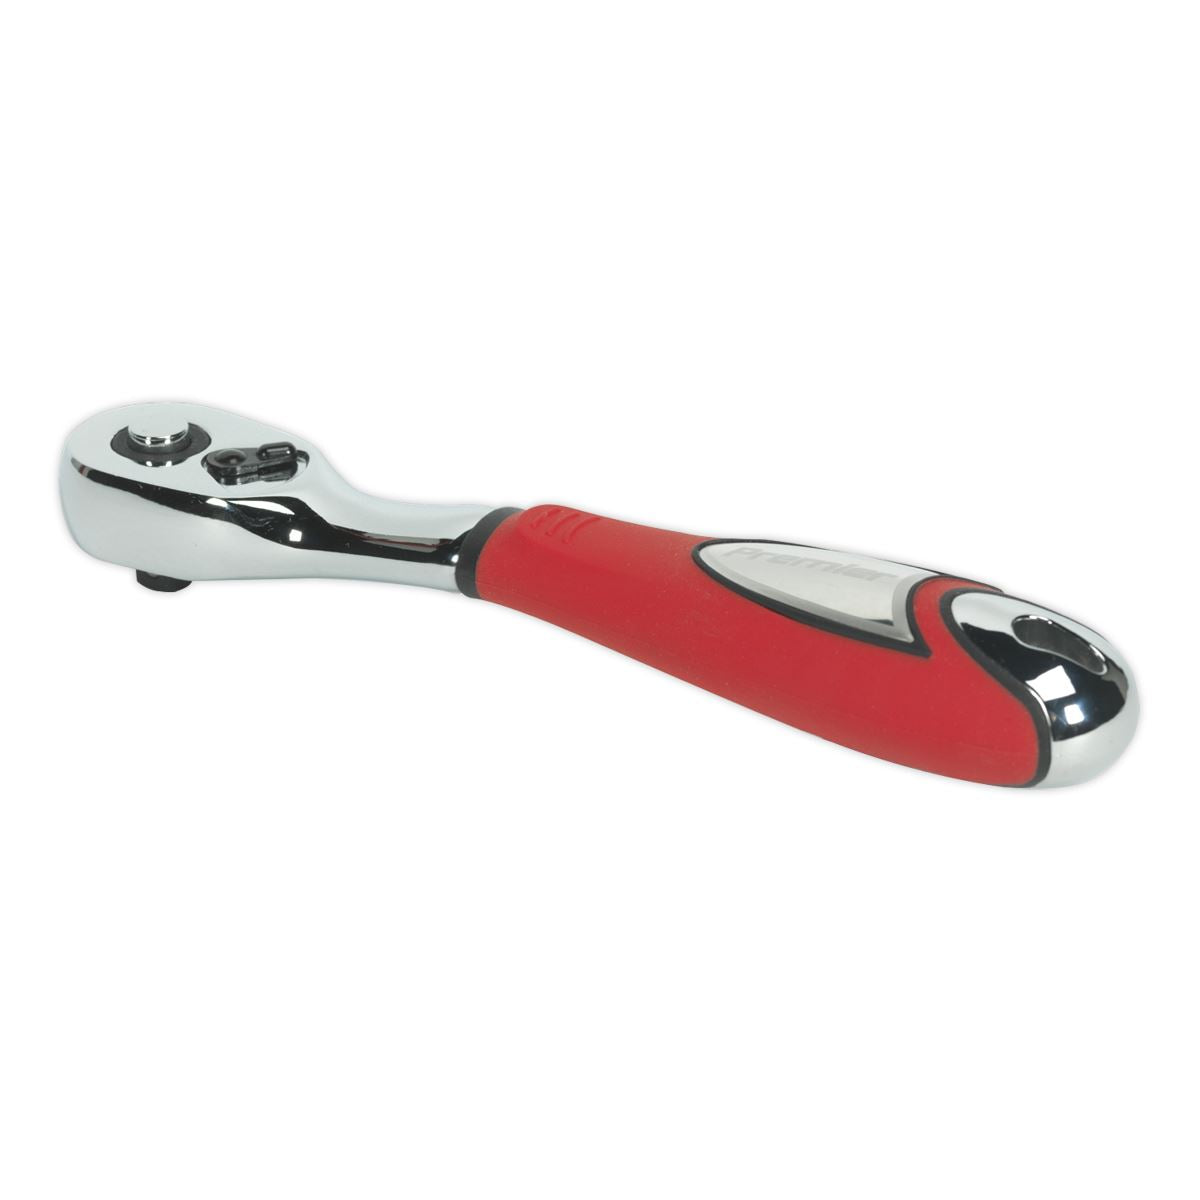 Sealey Premier Ratchet Wrench Offset 1/4"Sq Drive